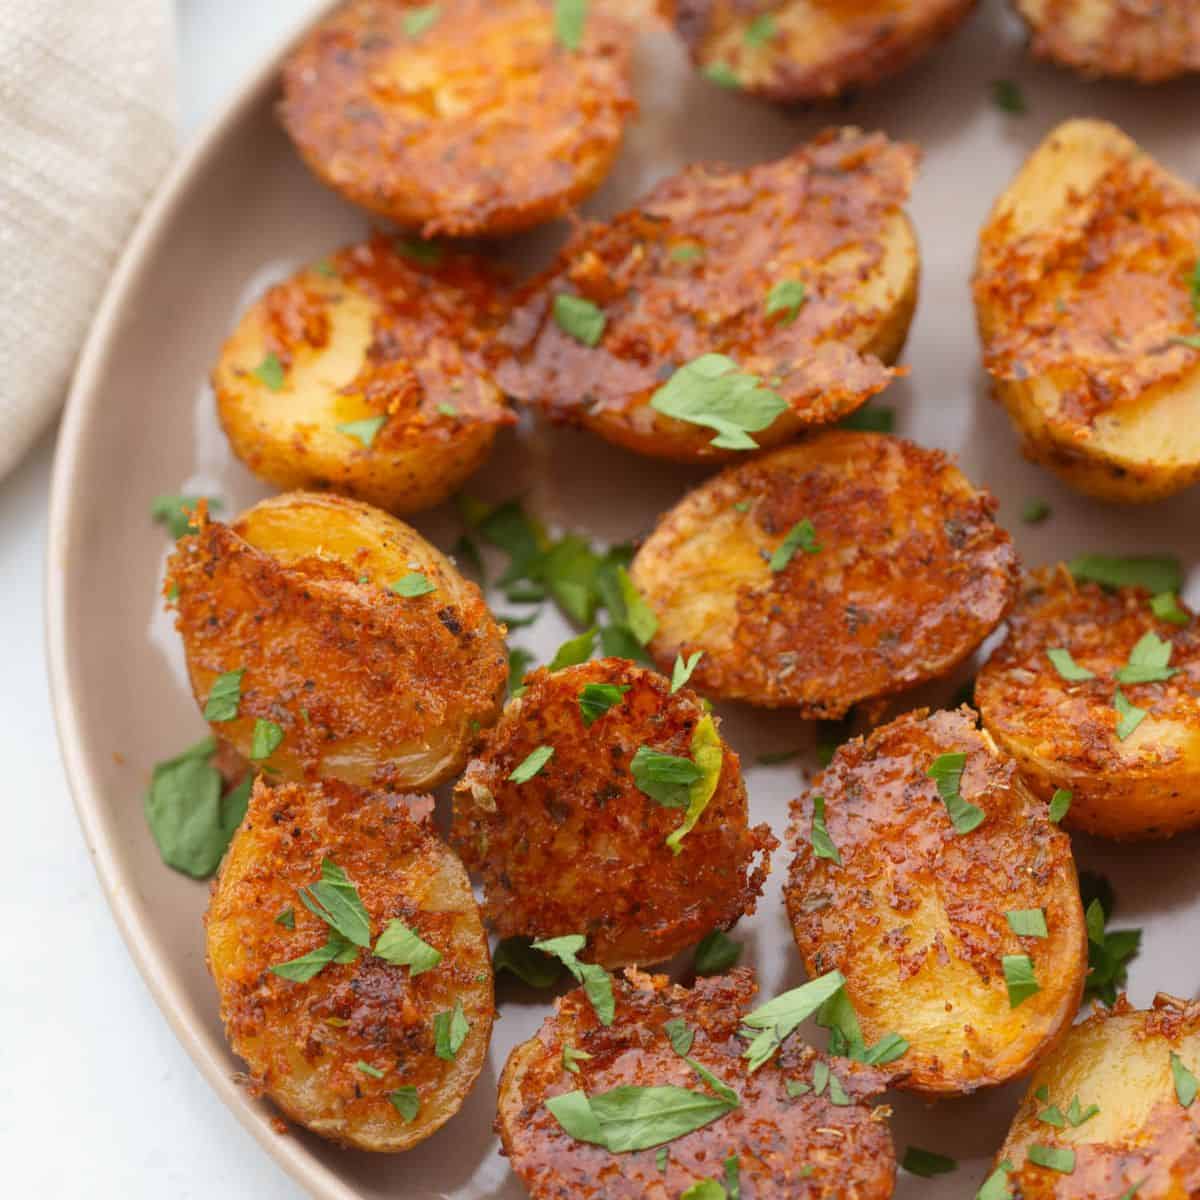 Crispy oven roasted baby potatoes with parmesan cheese and fresh parsley as garnish.